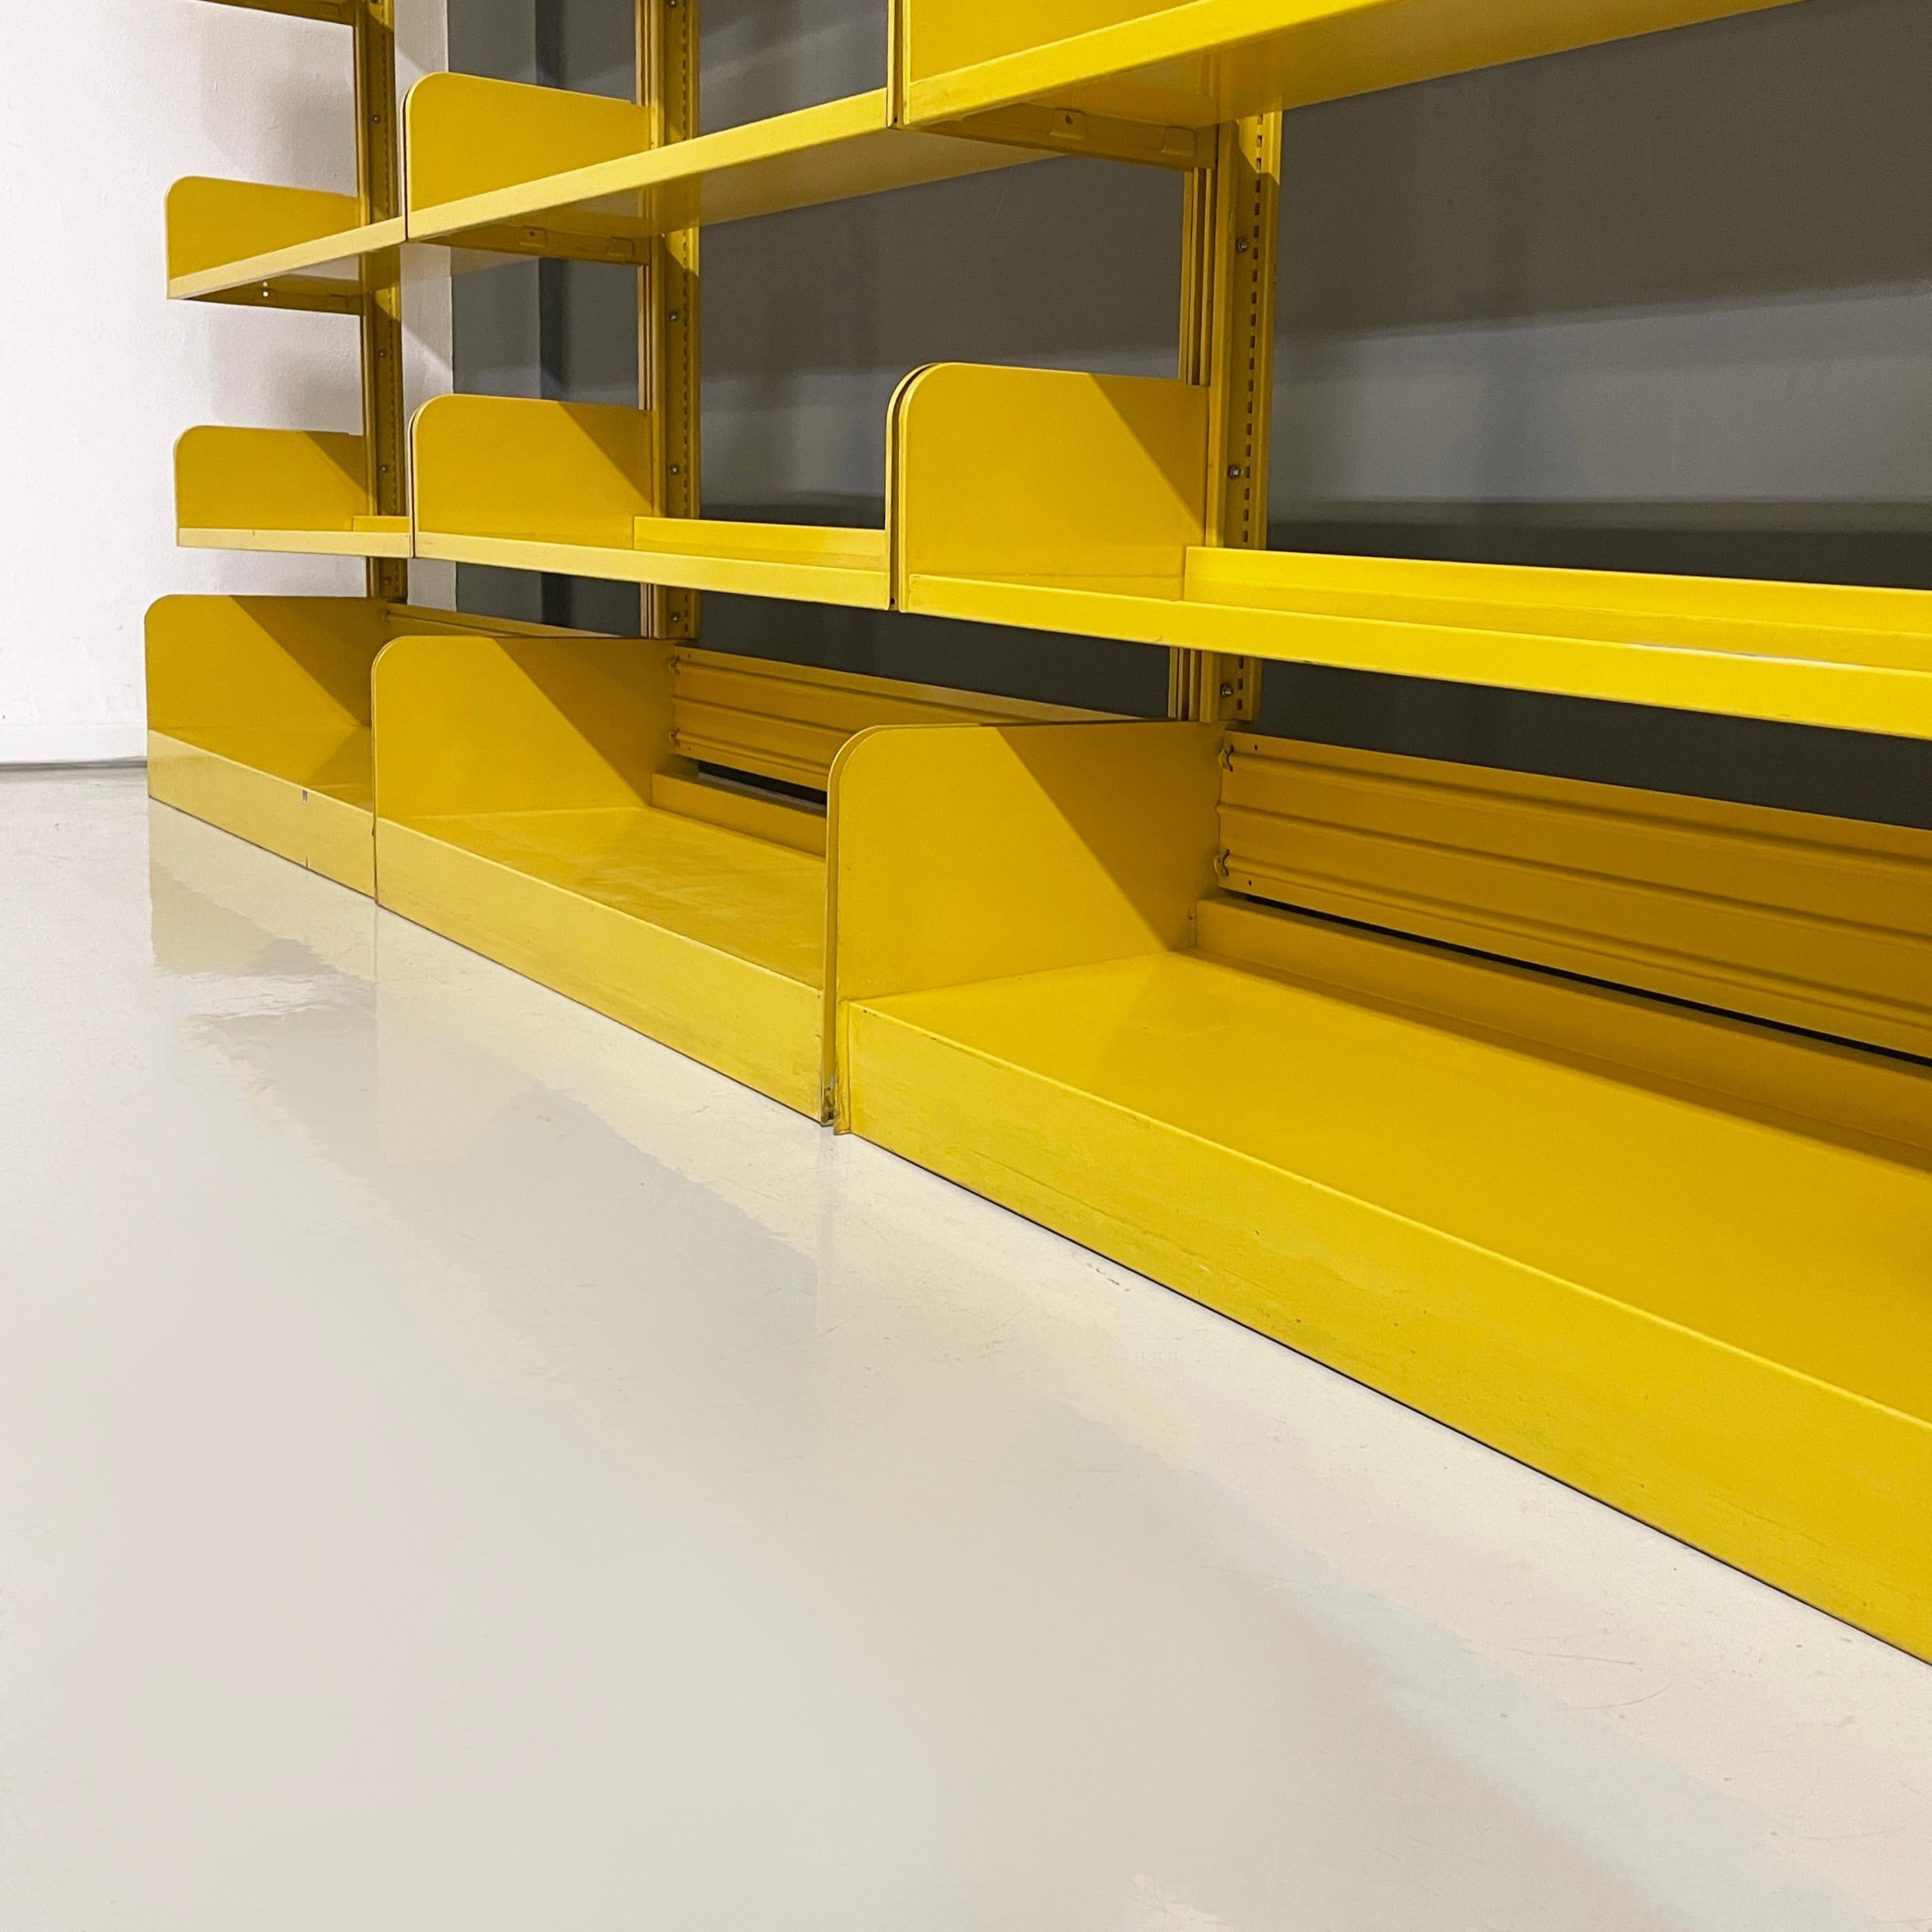 Mid-20th Century Italian mid-century Yellow metal modular bookcase Congresso by Lips Vago, 1960s For Sale